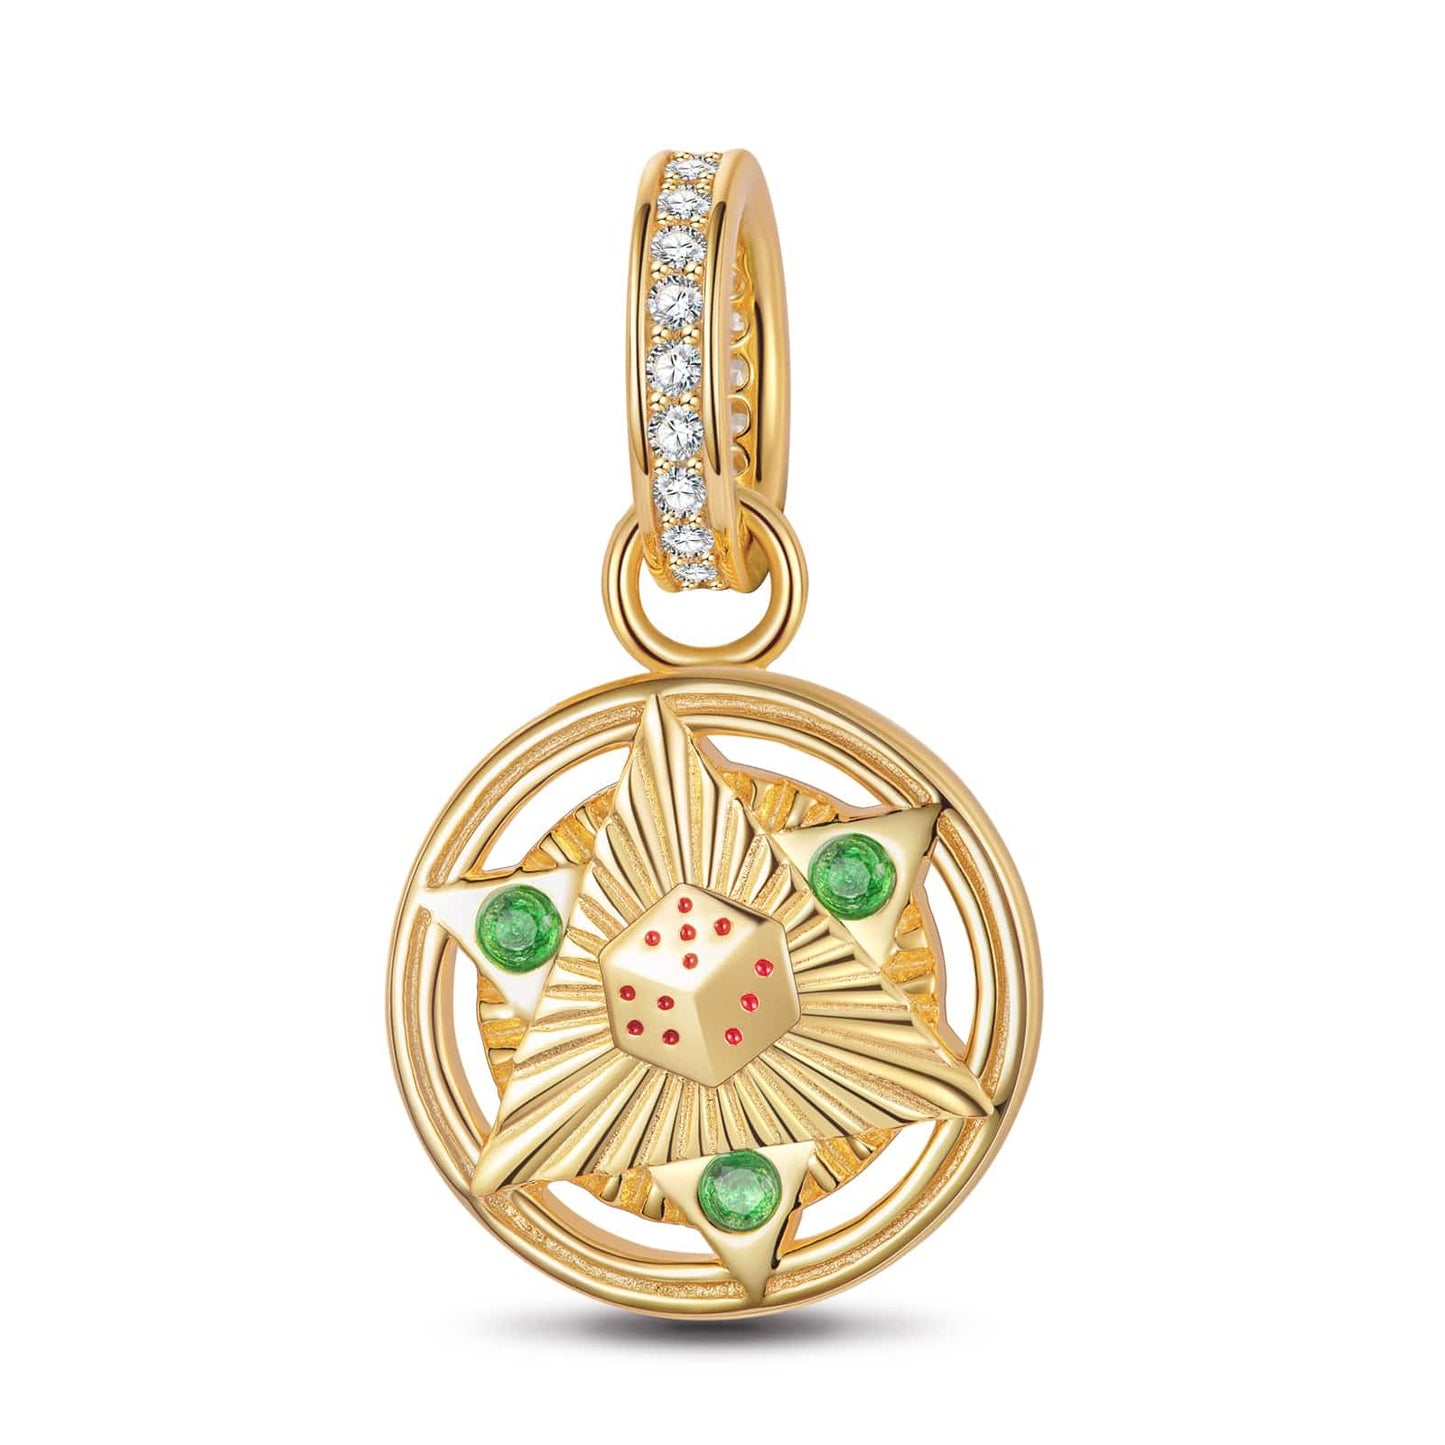 Lucky Mahjong Tarnish-resistant Silver Charms With Enamel In 14K Gold Plated